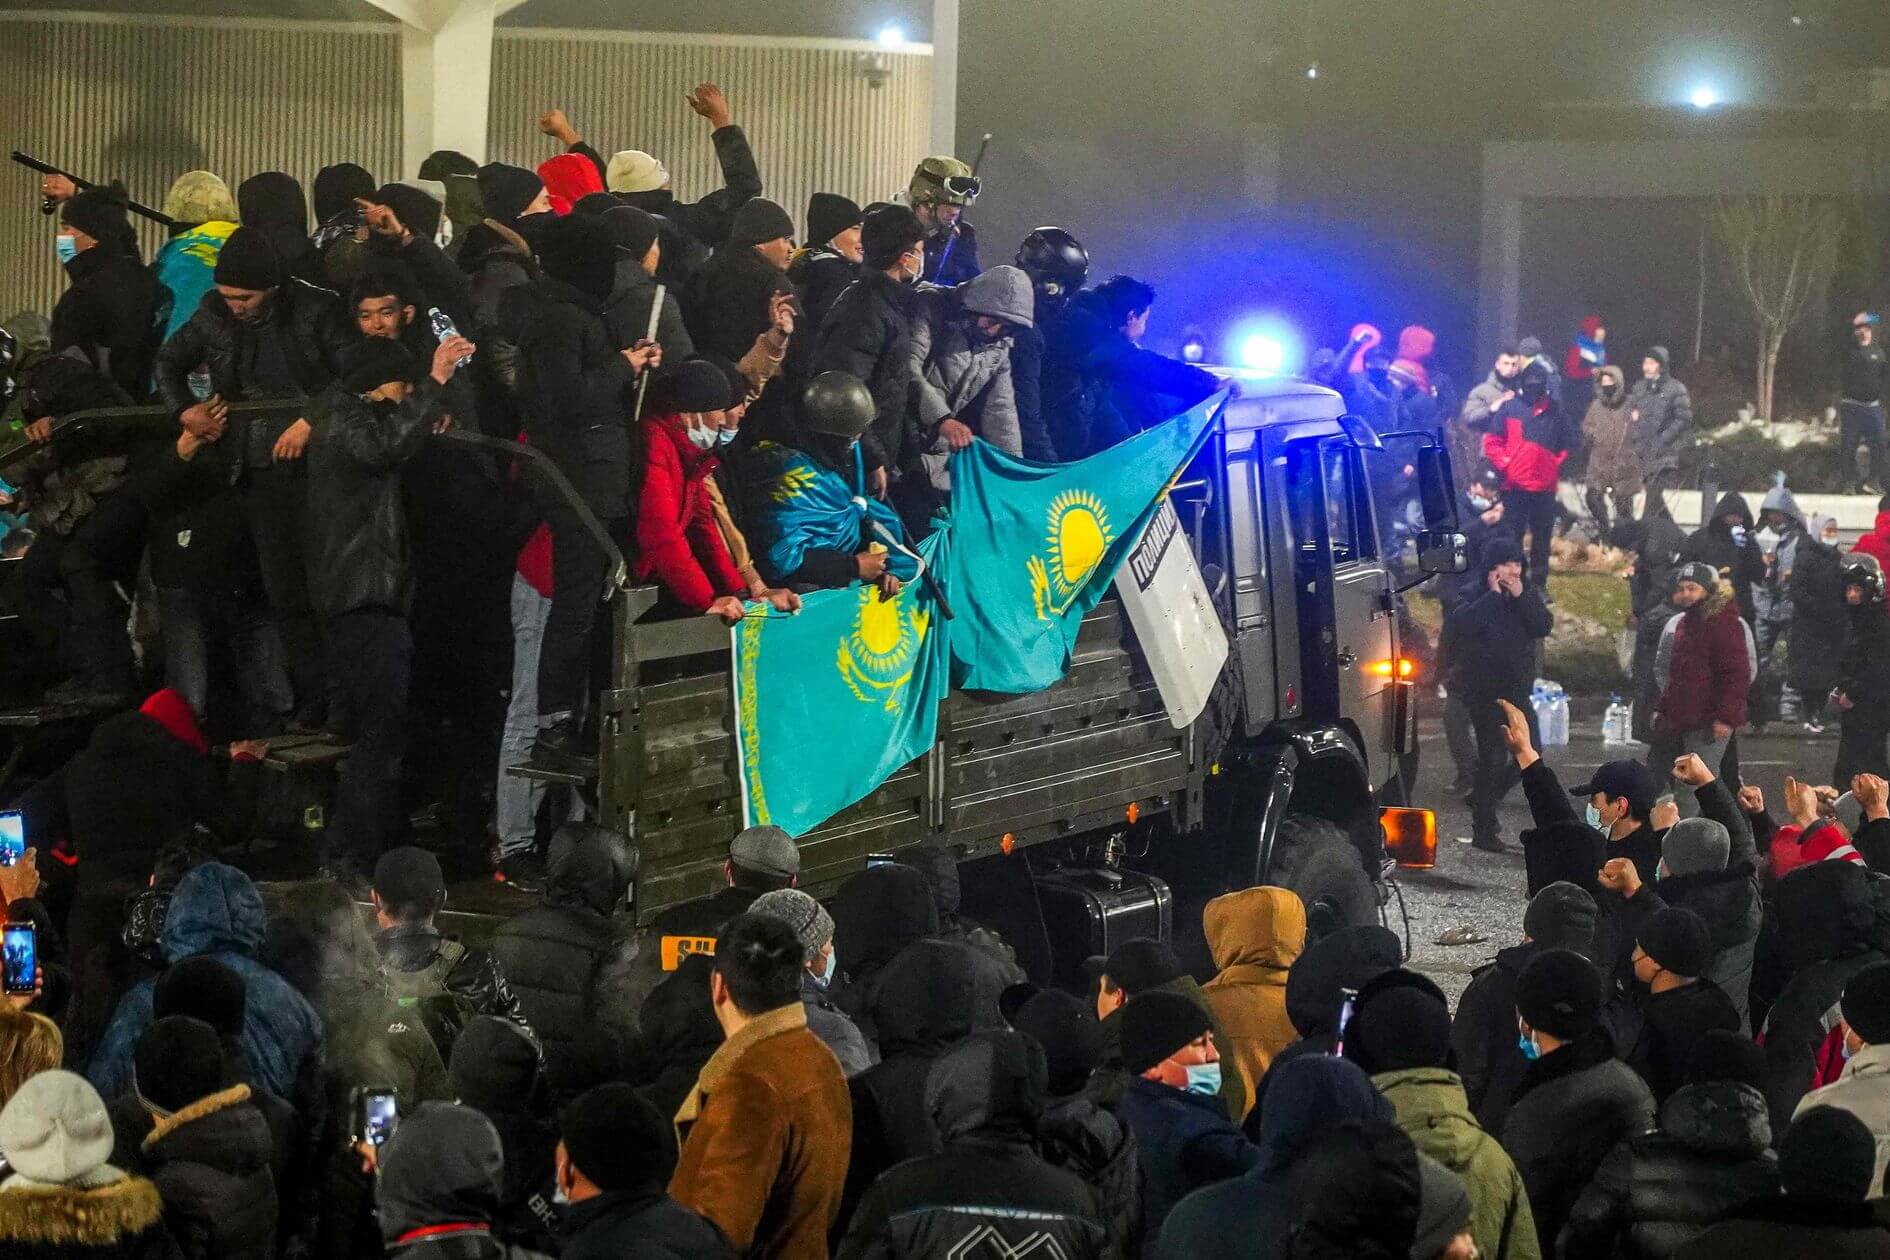 Kazakhstan Government Resigns Amid Violent Protests Over Hike in Fuel Prices